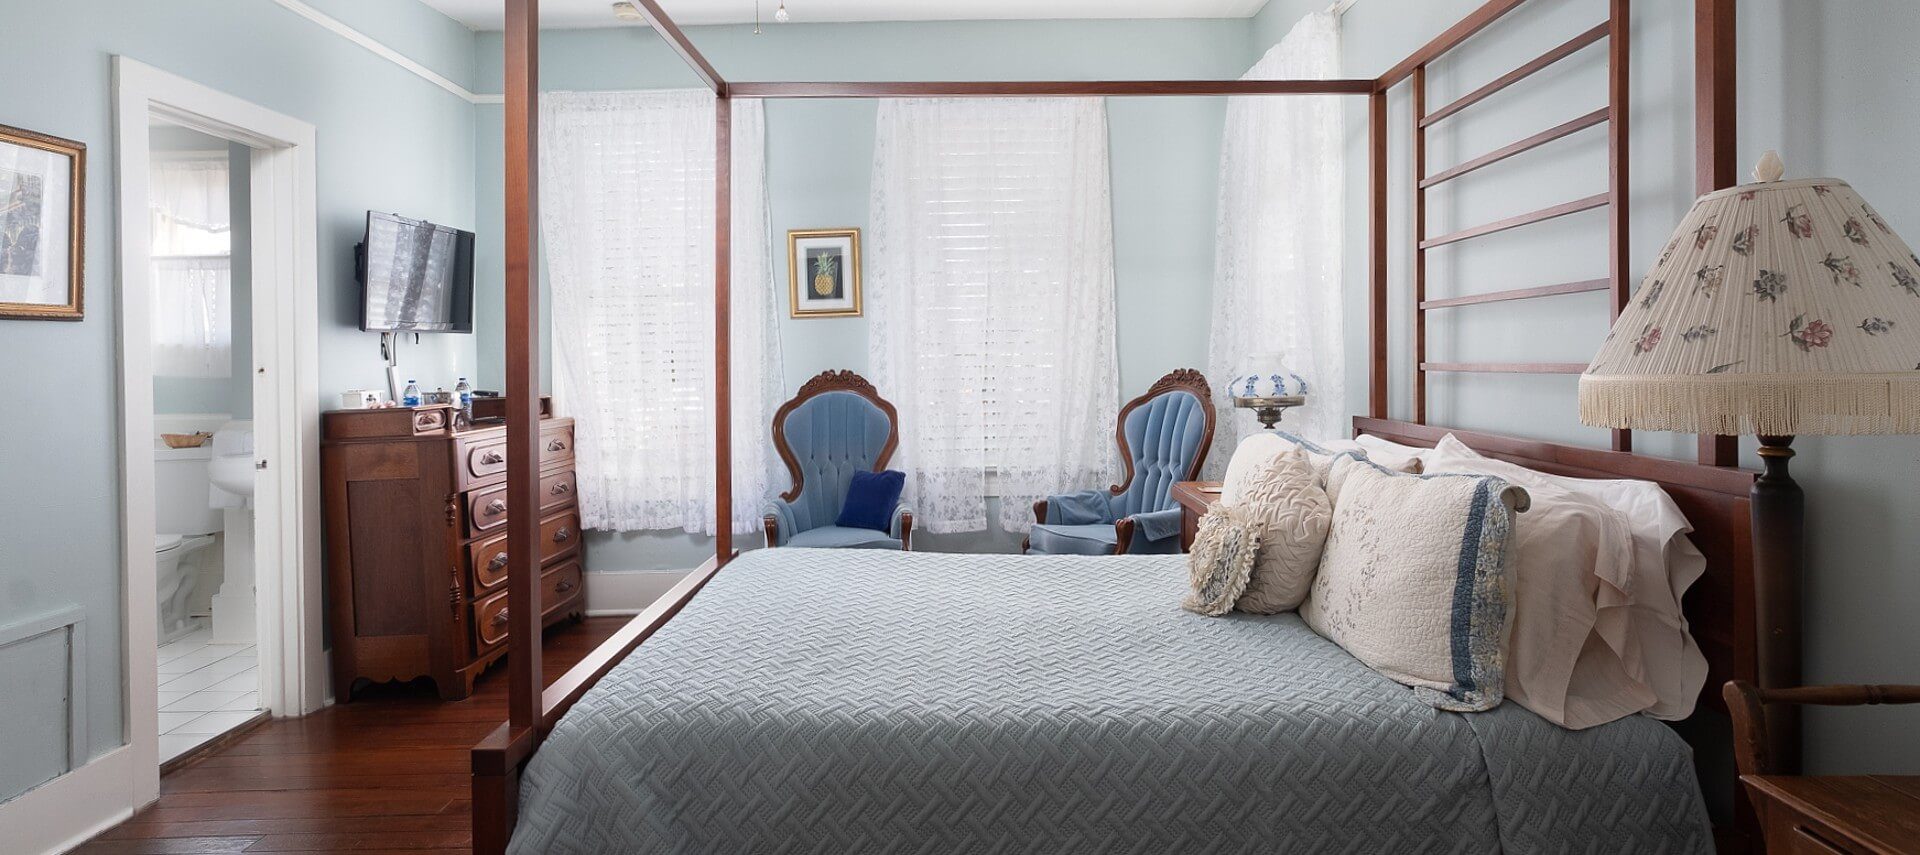 Bright guestroom with four poster bed, upholstered sitting chairs, and wood dresser with TV overhead